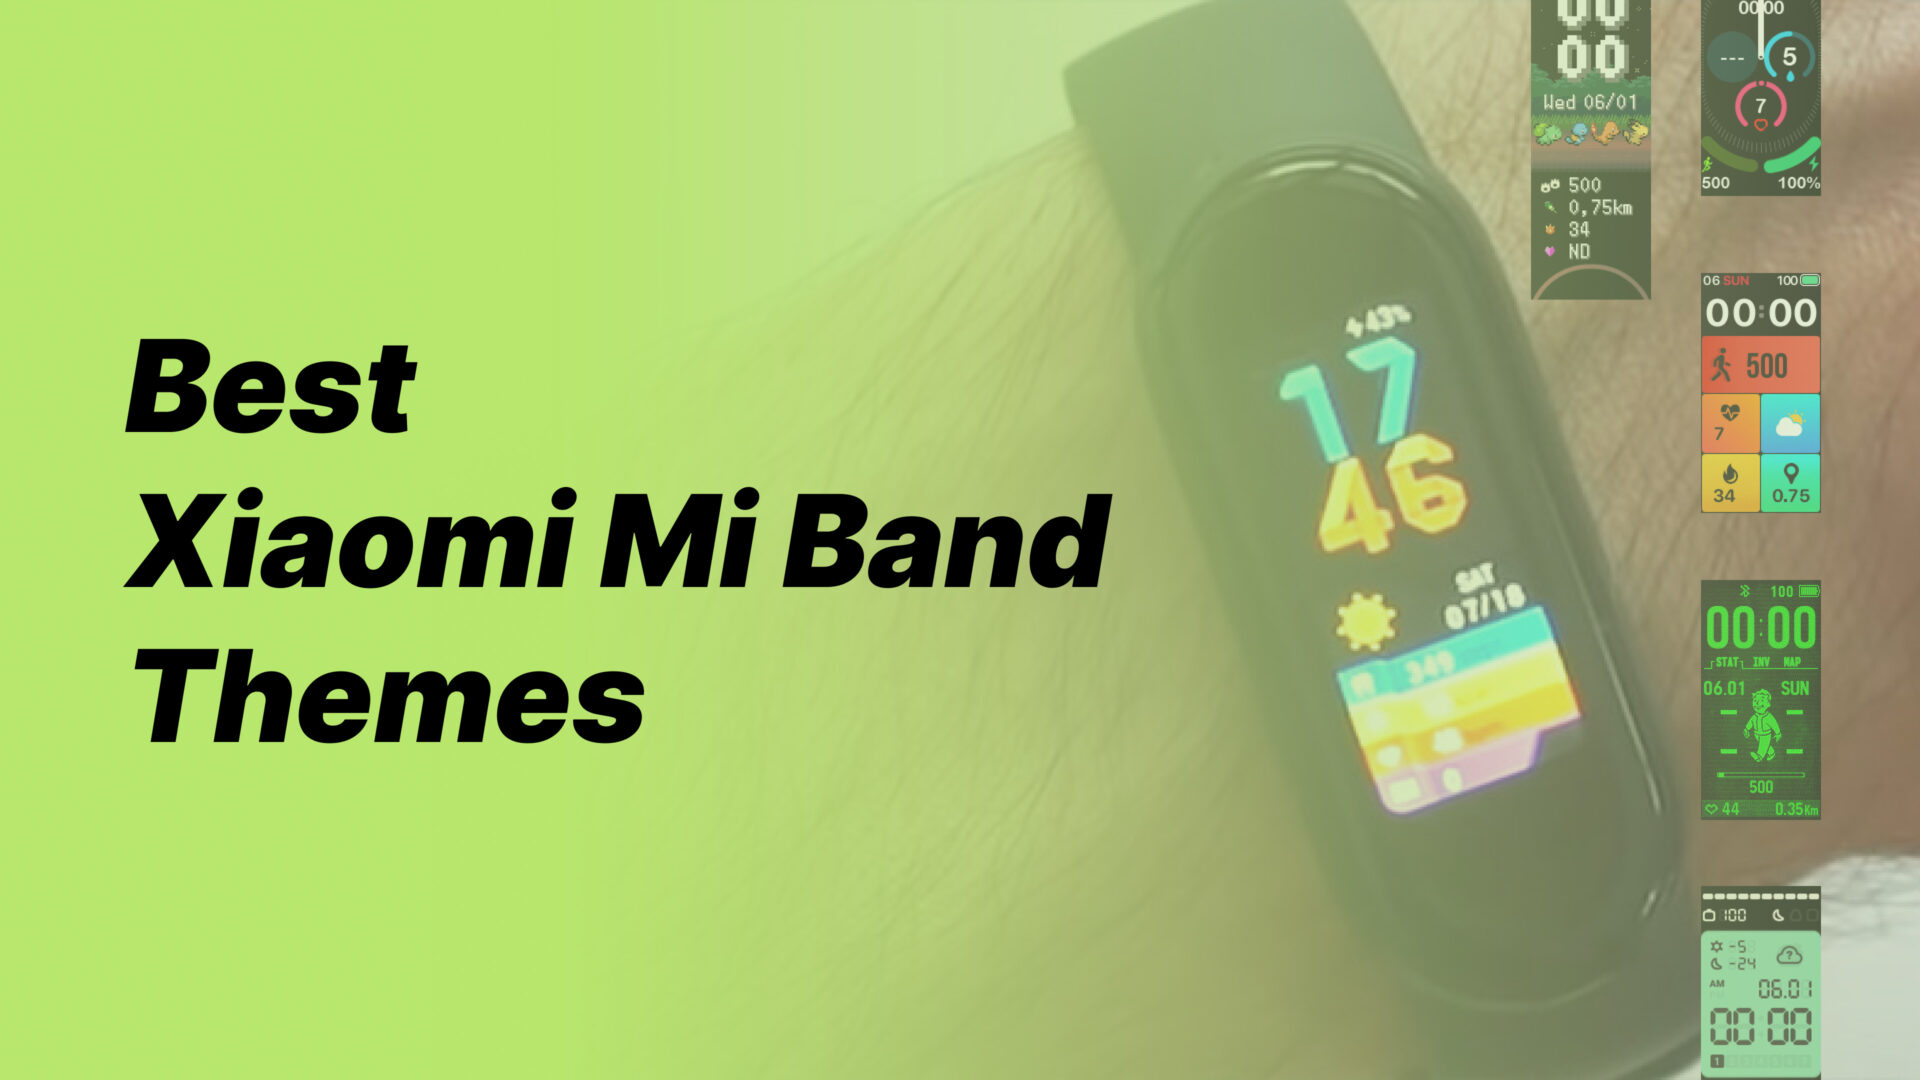 9 Best Xiaomi Mi Band Themes You Can Customize Perfectly - xiaomiui